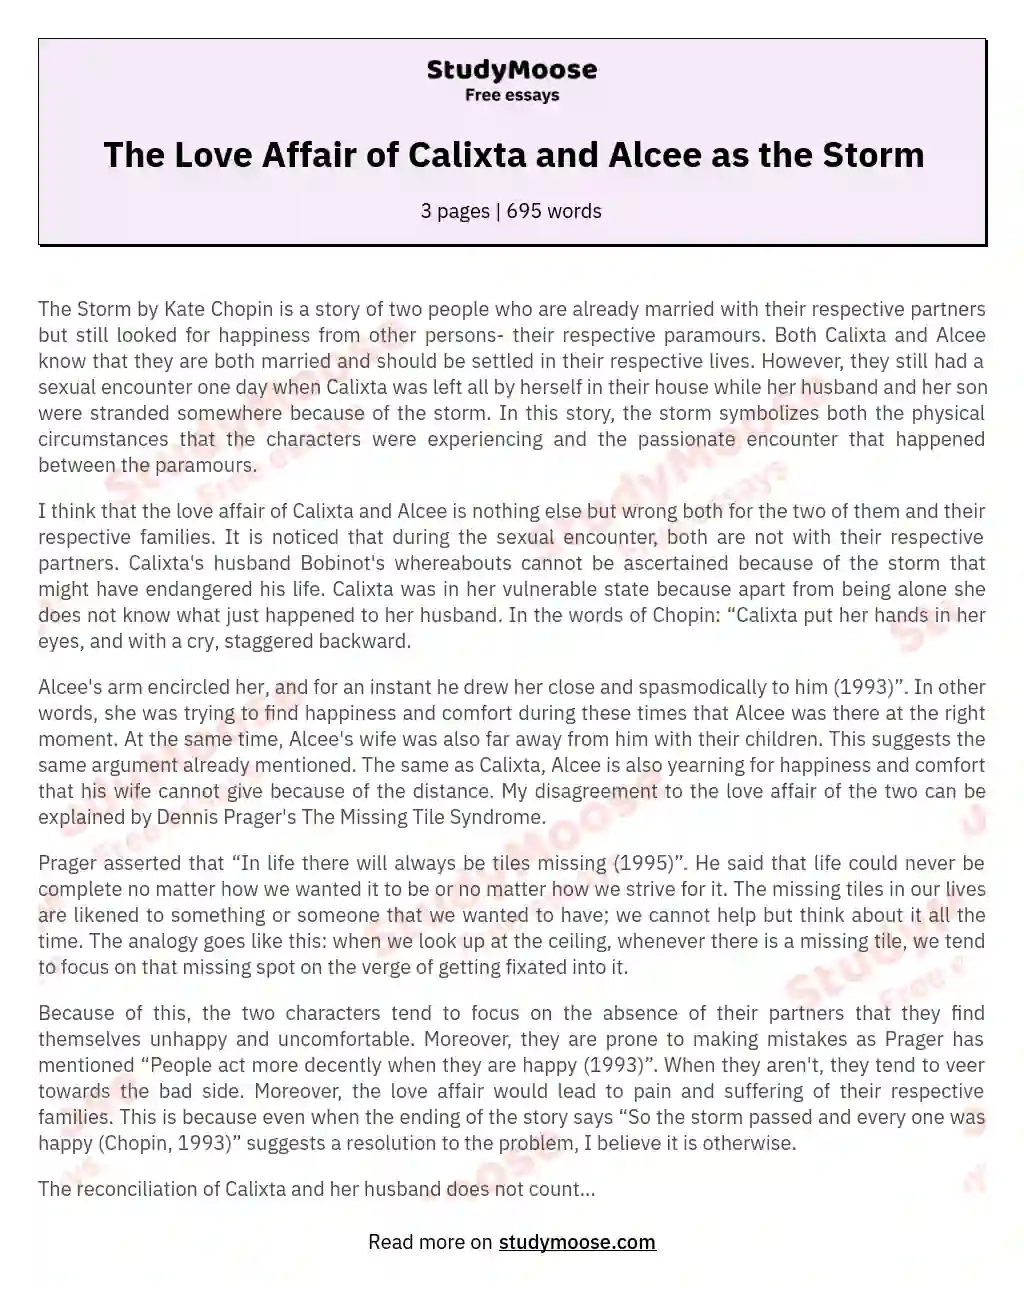 The Love Affair of Calixta and Alcee as the Storm essay